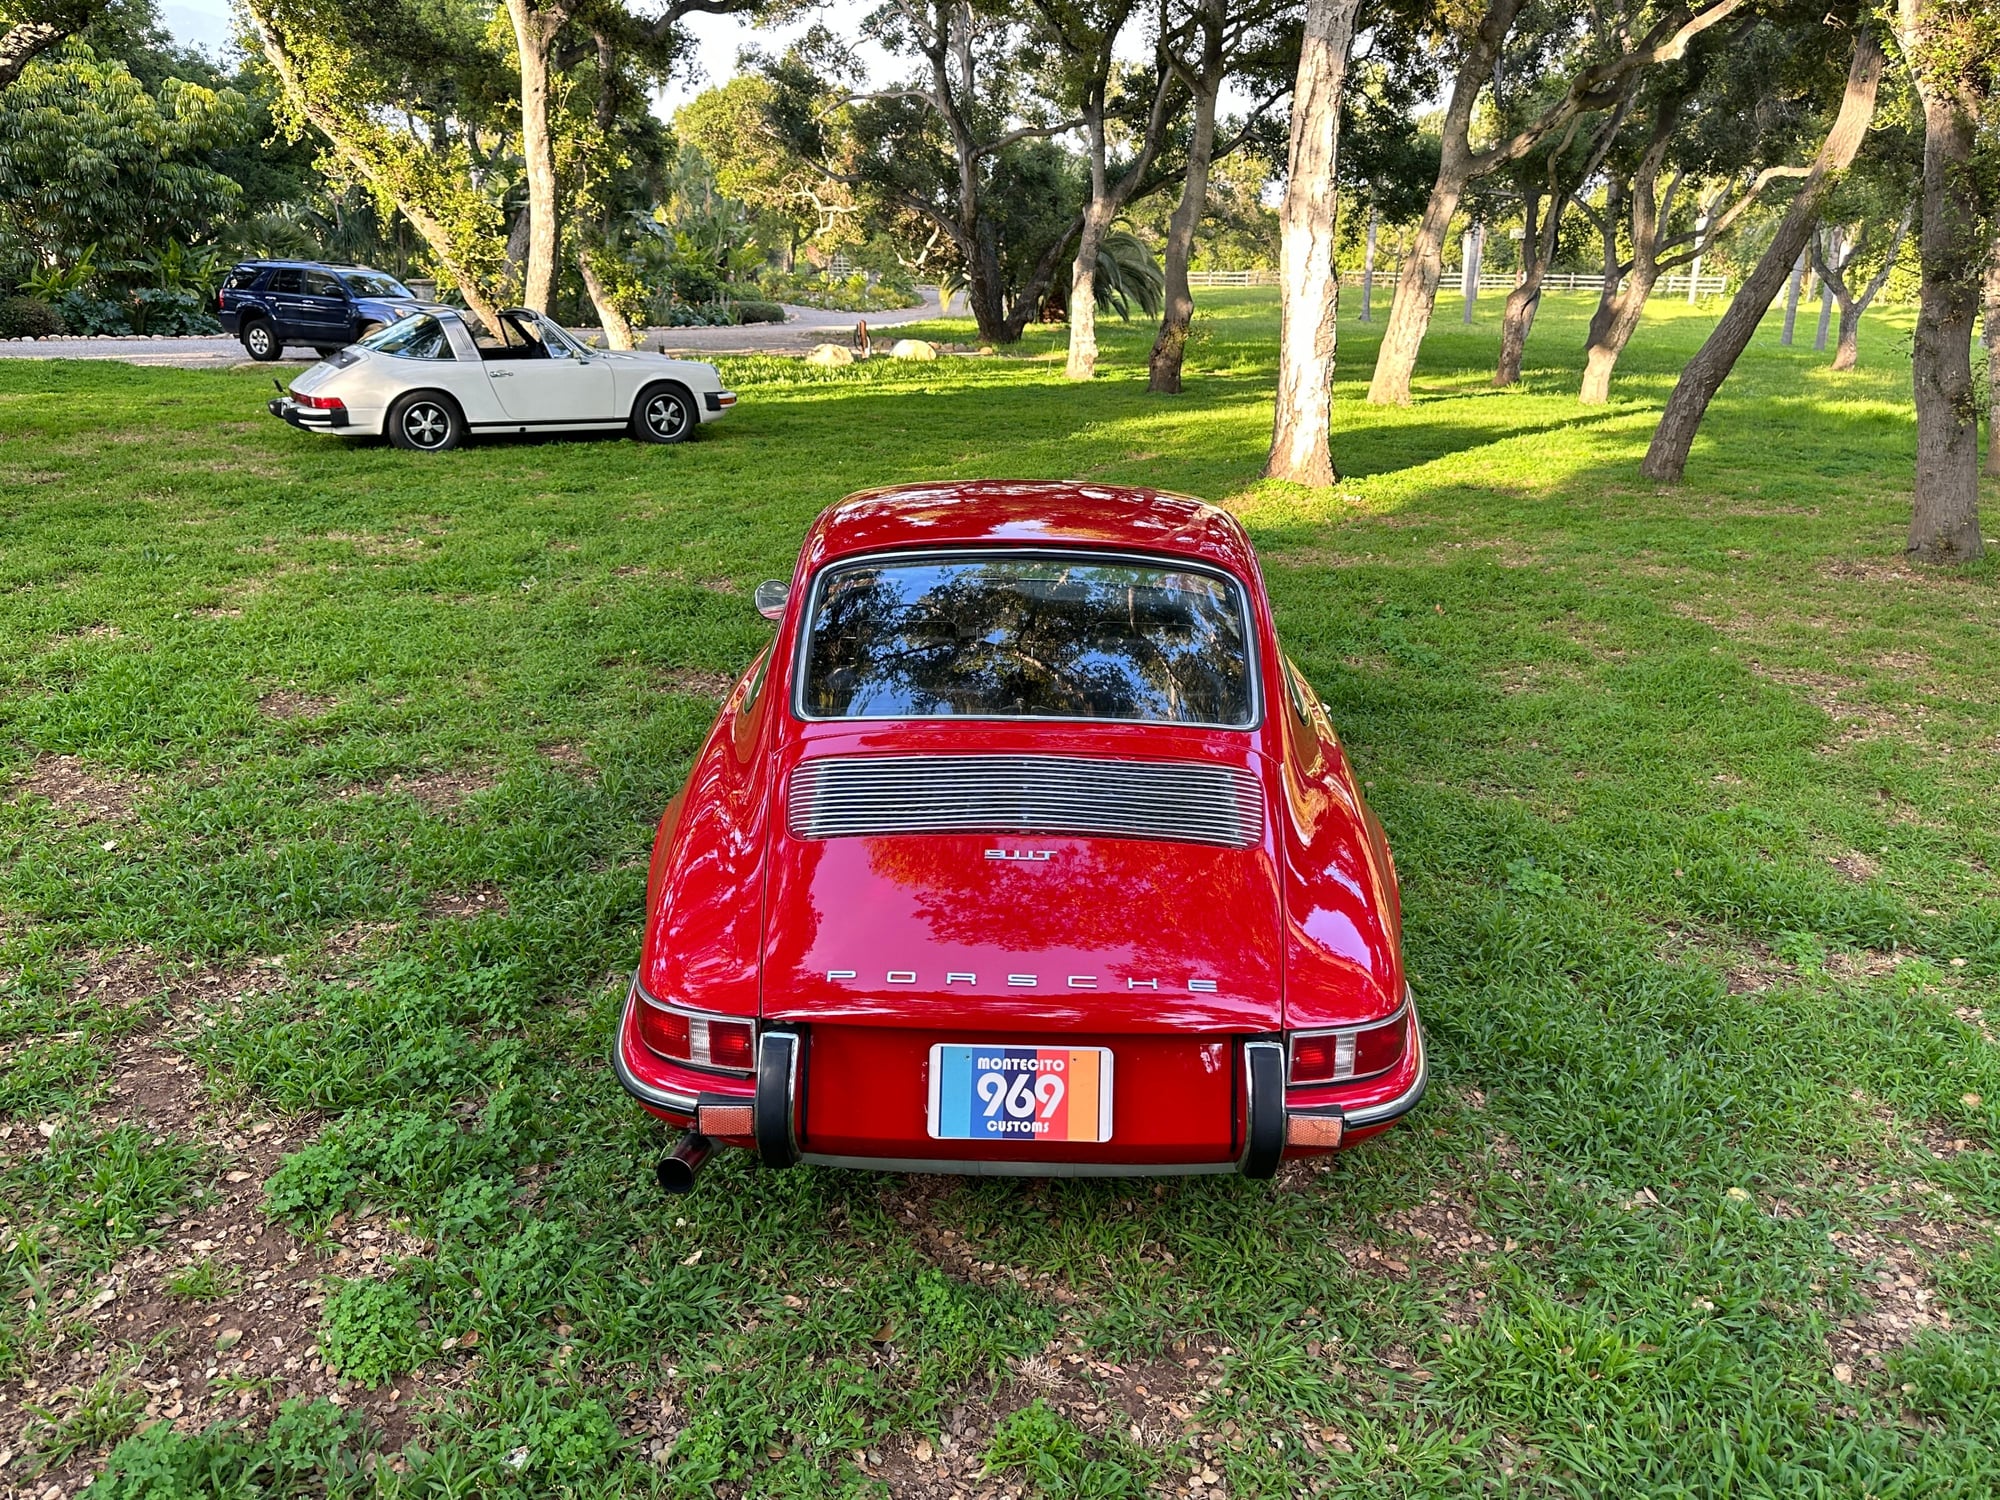 1969 Porsche 911 - 1969 Porsche 911T in outstanding condition. Polo Red over Black interior. - Used - VIN 119120346 - 79,000 Miles - 6 cyl - 2WD - Manual - Coupe - Red - Montecito, CA 93108, United States